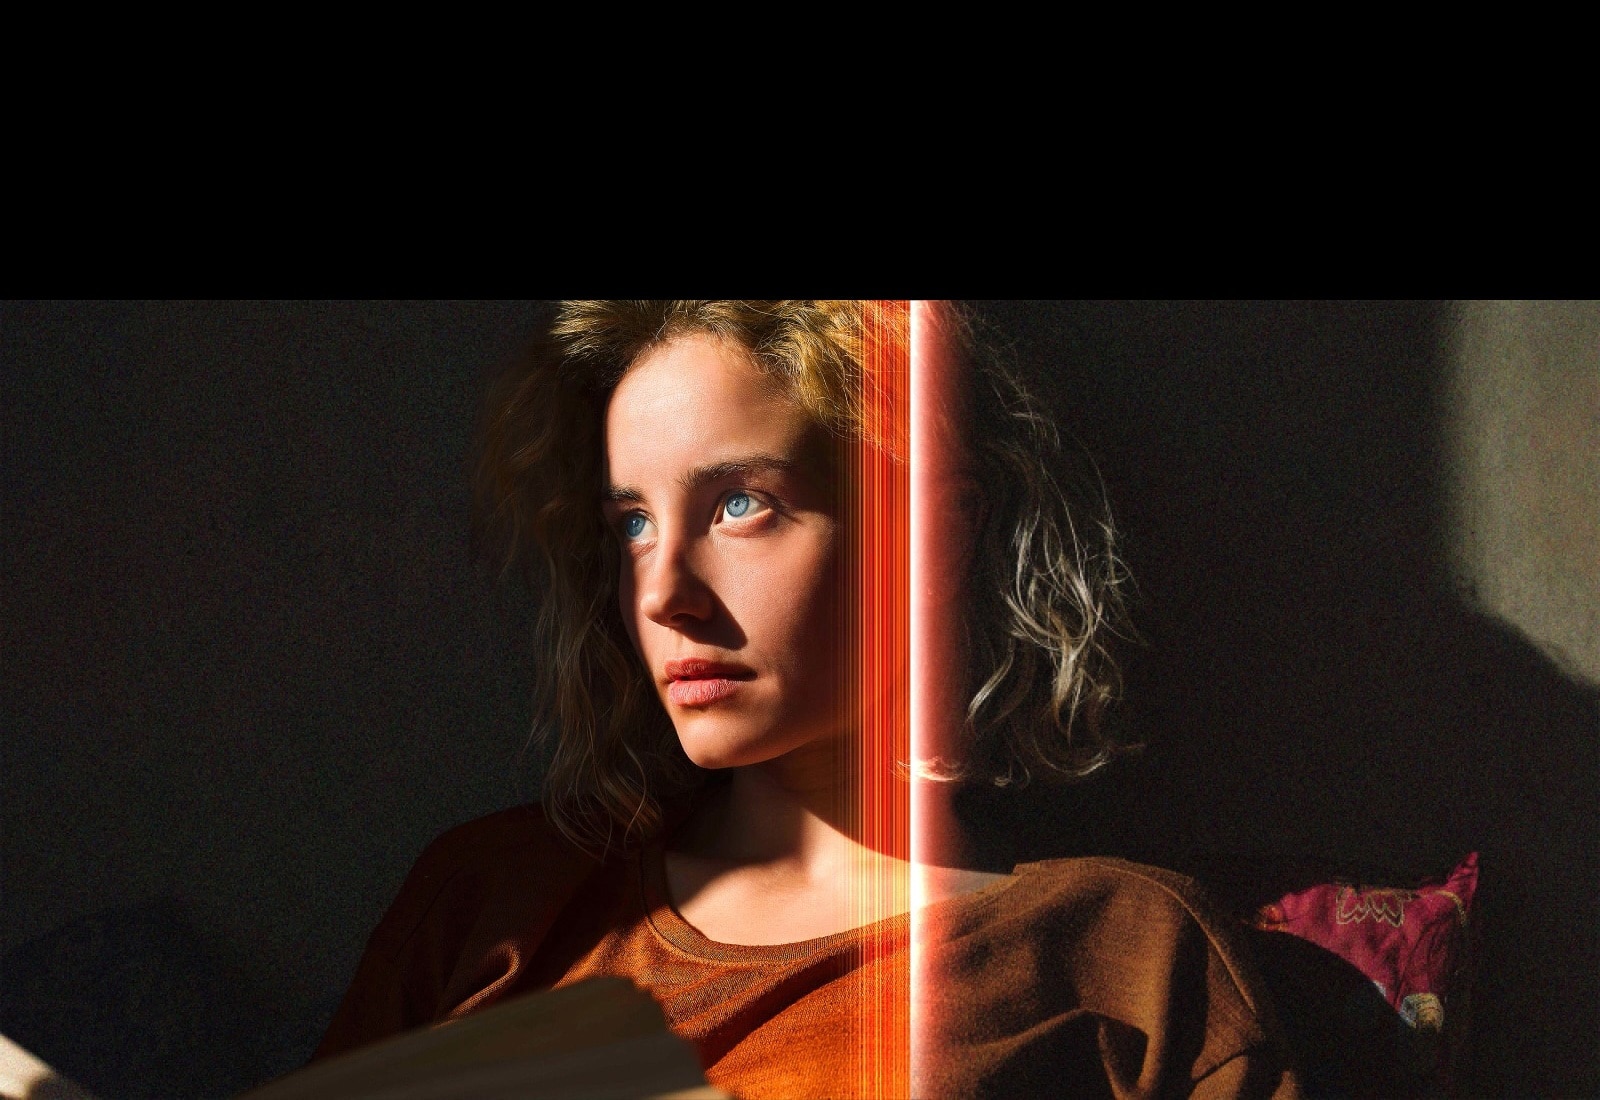 A woman with piercing blue eyes and a burnt orange top in a dark space. Red lines depicting AI refinements cover part of her face, which is bright and detailed, while the rest of the image looks dull. 